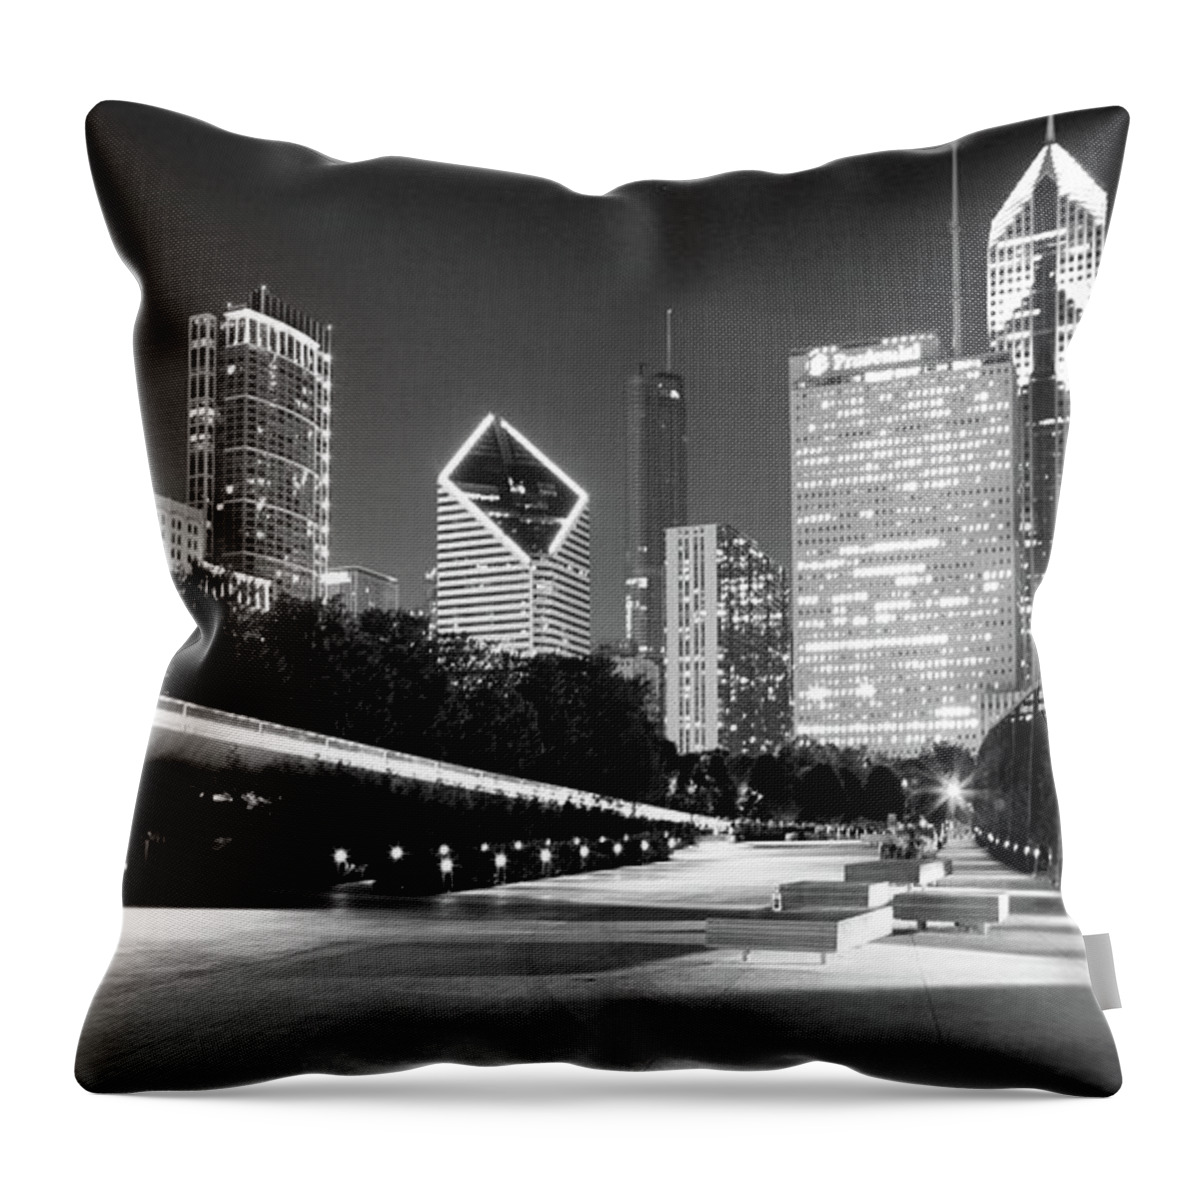 Architecture Throw Pillow featuring the photograph Chicago Night Lights Skyline by Patrick Malon